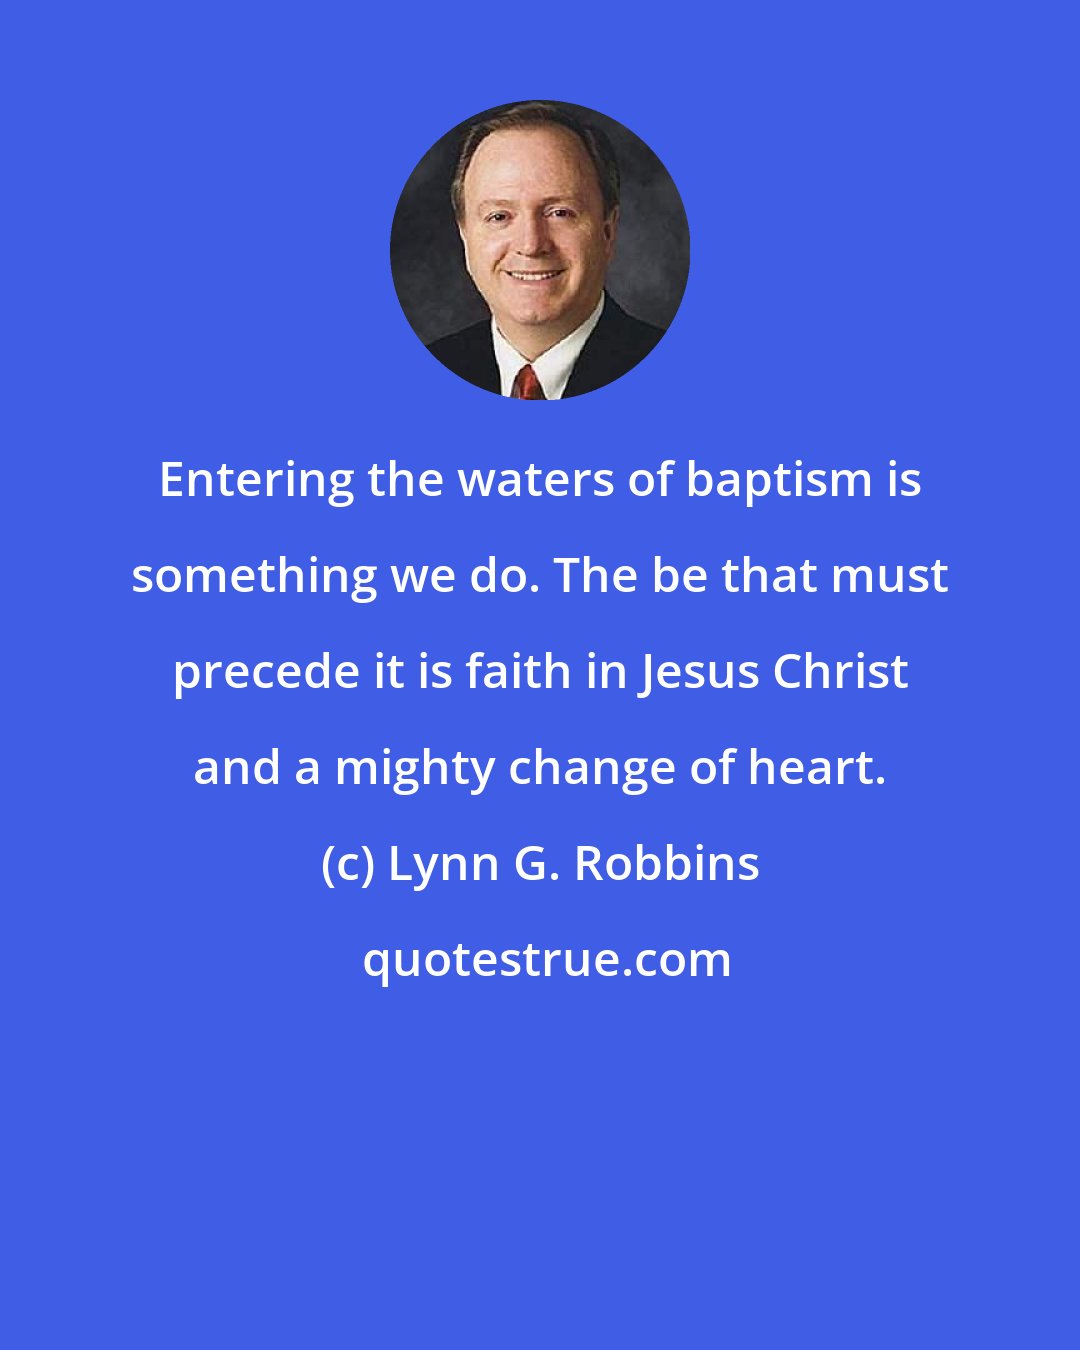 Lynn G. Robbins: Entering the waters of baptism is something we do. The be that must precede it is faith in Jesus Christ and a mighty change of heart.